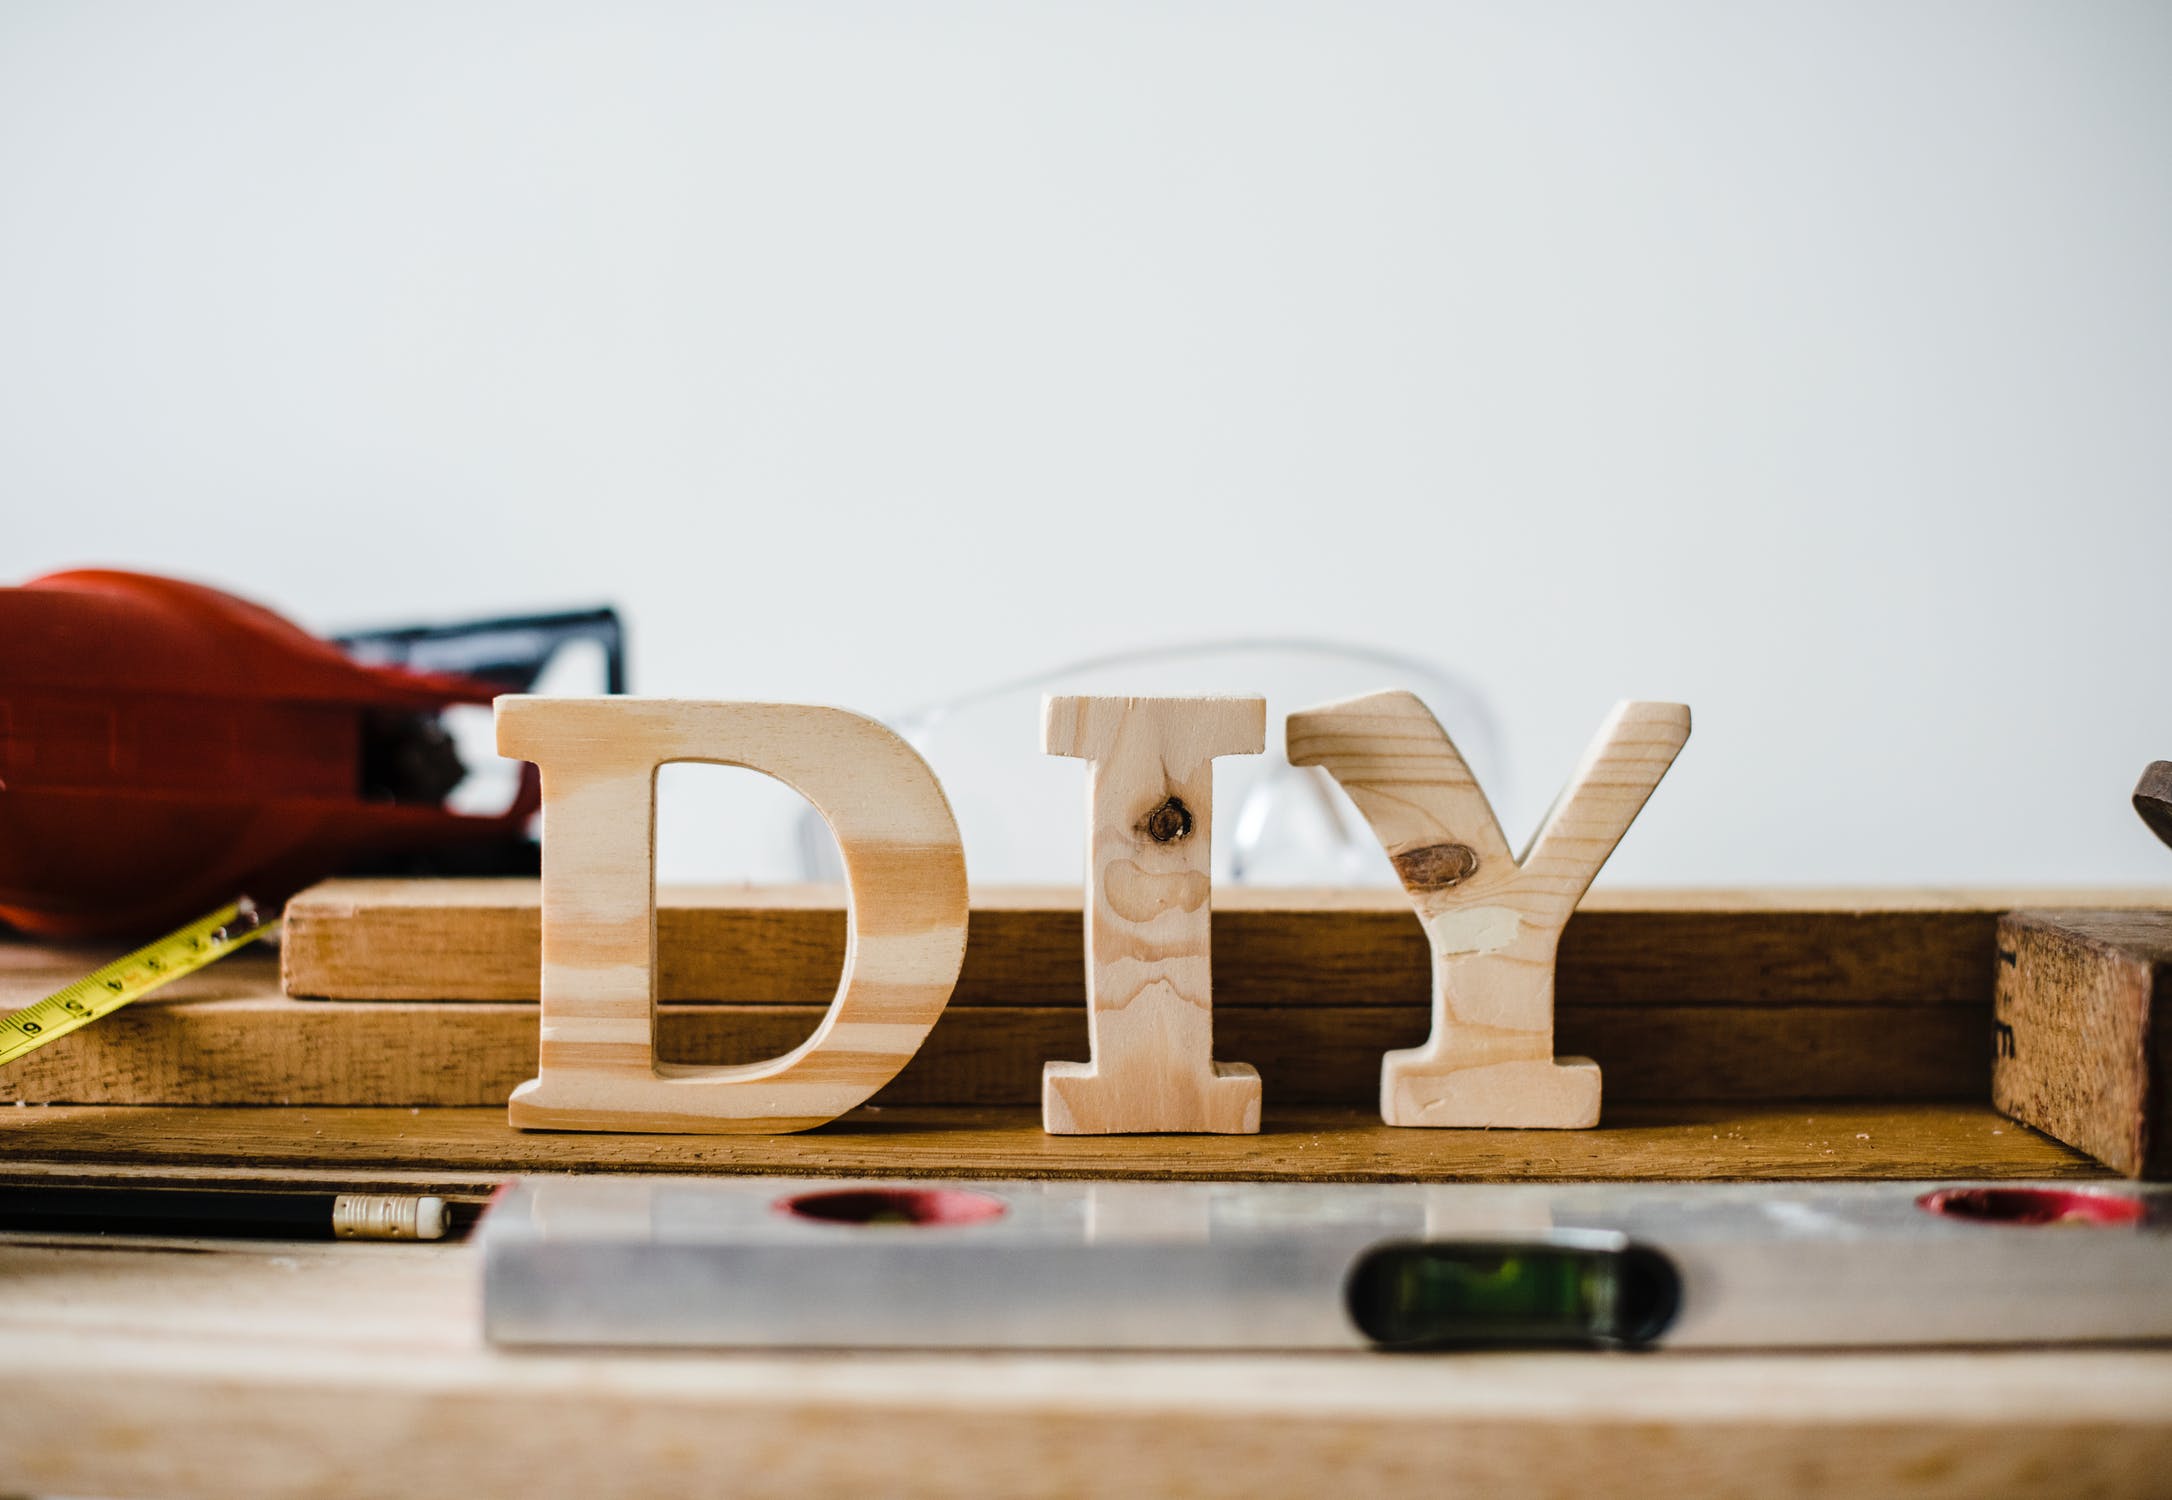 5 Easy DIY Projects That Can Add Value to Your Property